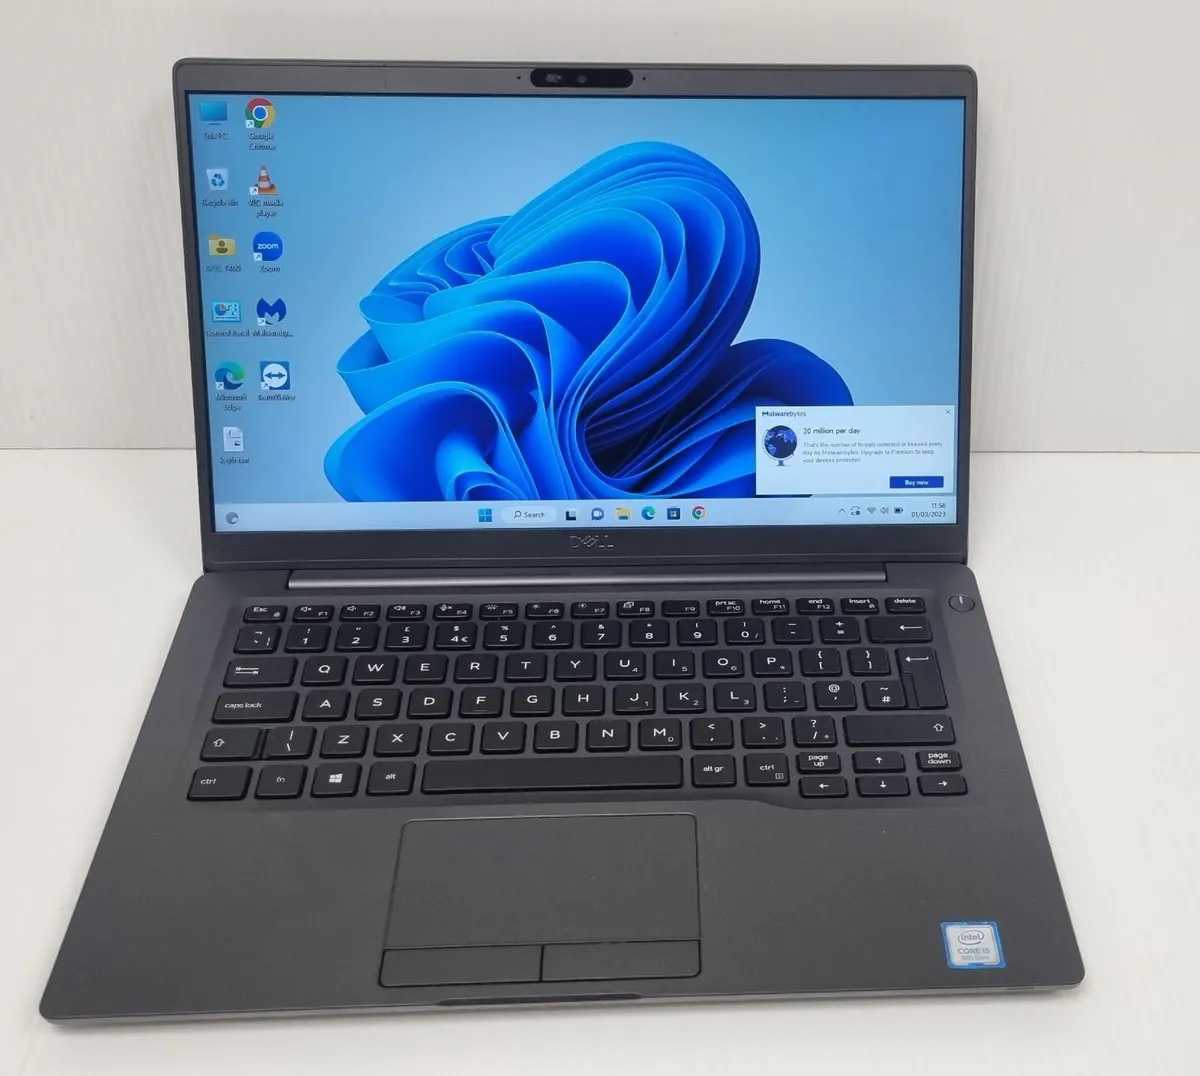 Dell Latitude 3410 i5 10th Gen 8GB 512GB SSD for sale in Laois for €400 on  DoneDeal